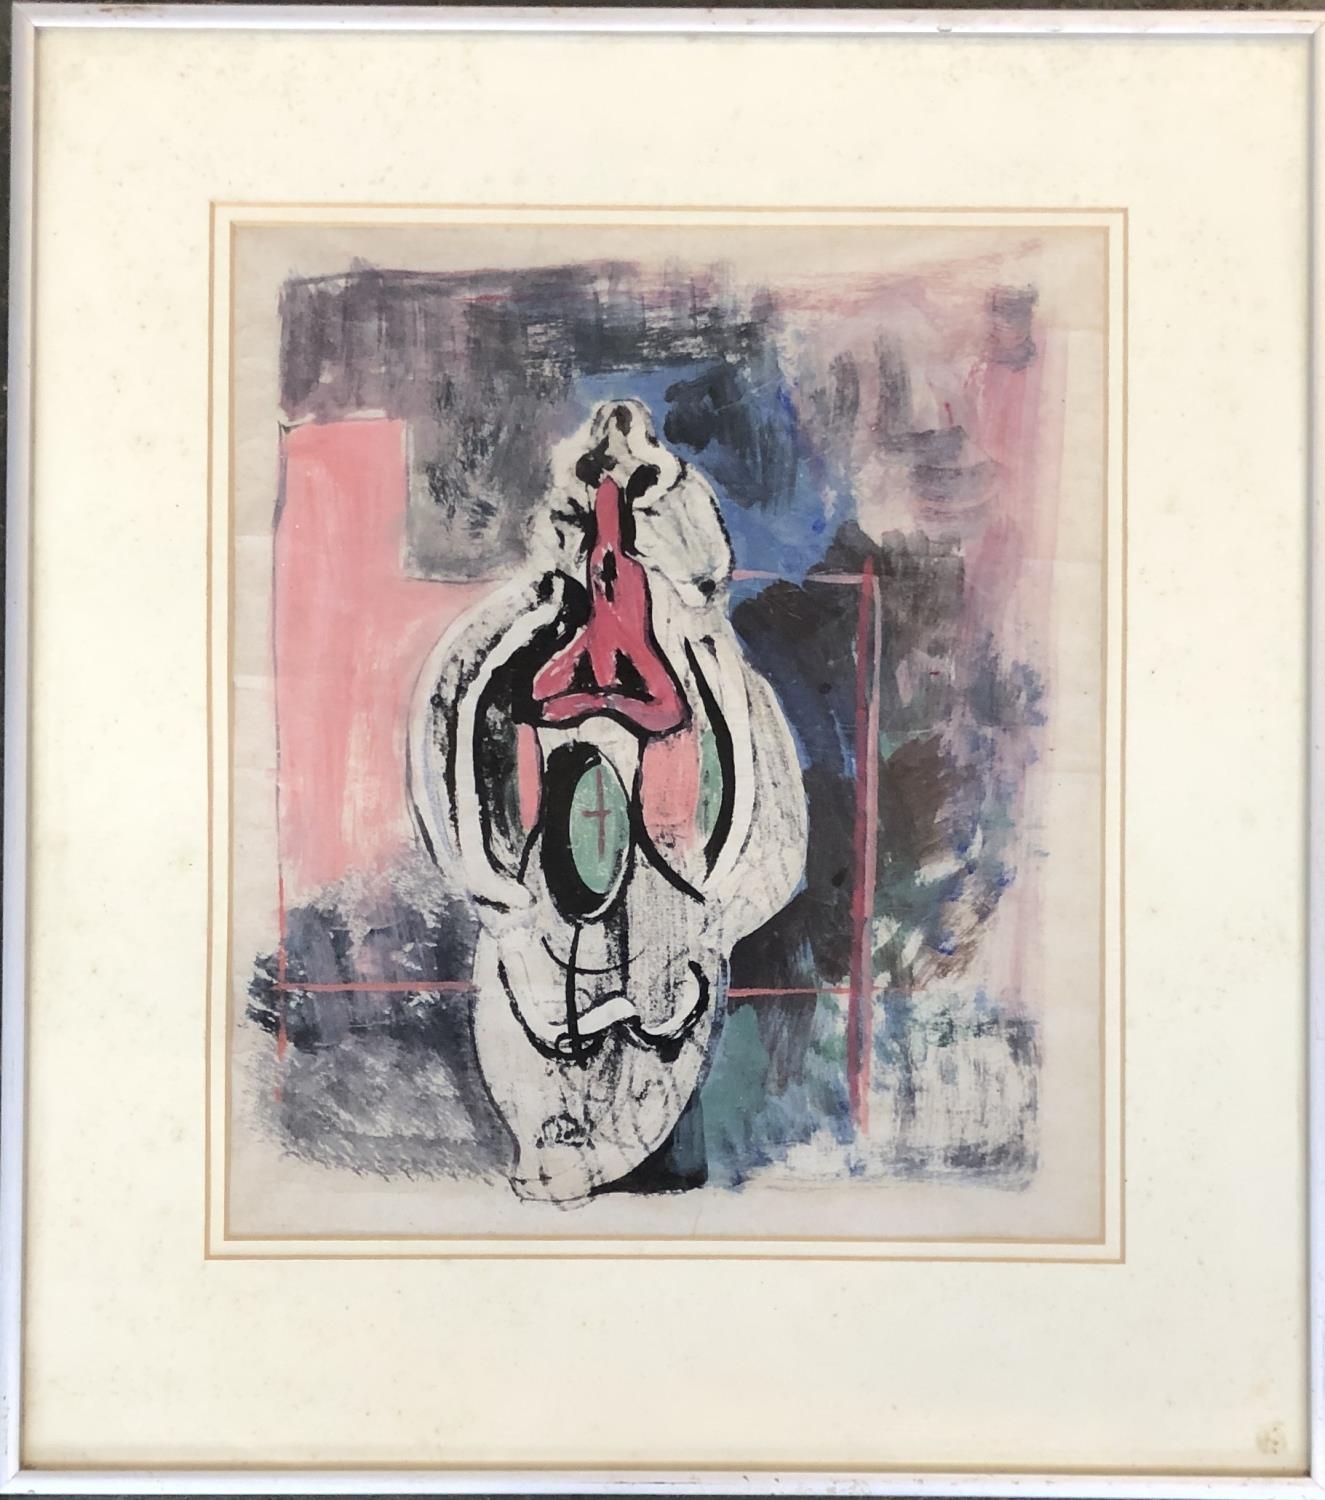 Julius B. Stafford-Baker (1904-1988), abstract form in pink, mixed media, 36x31cm